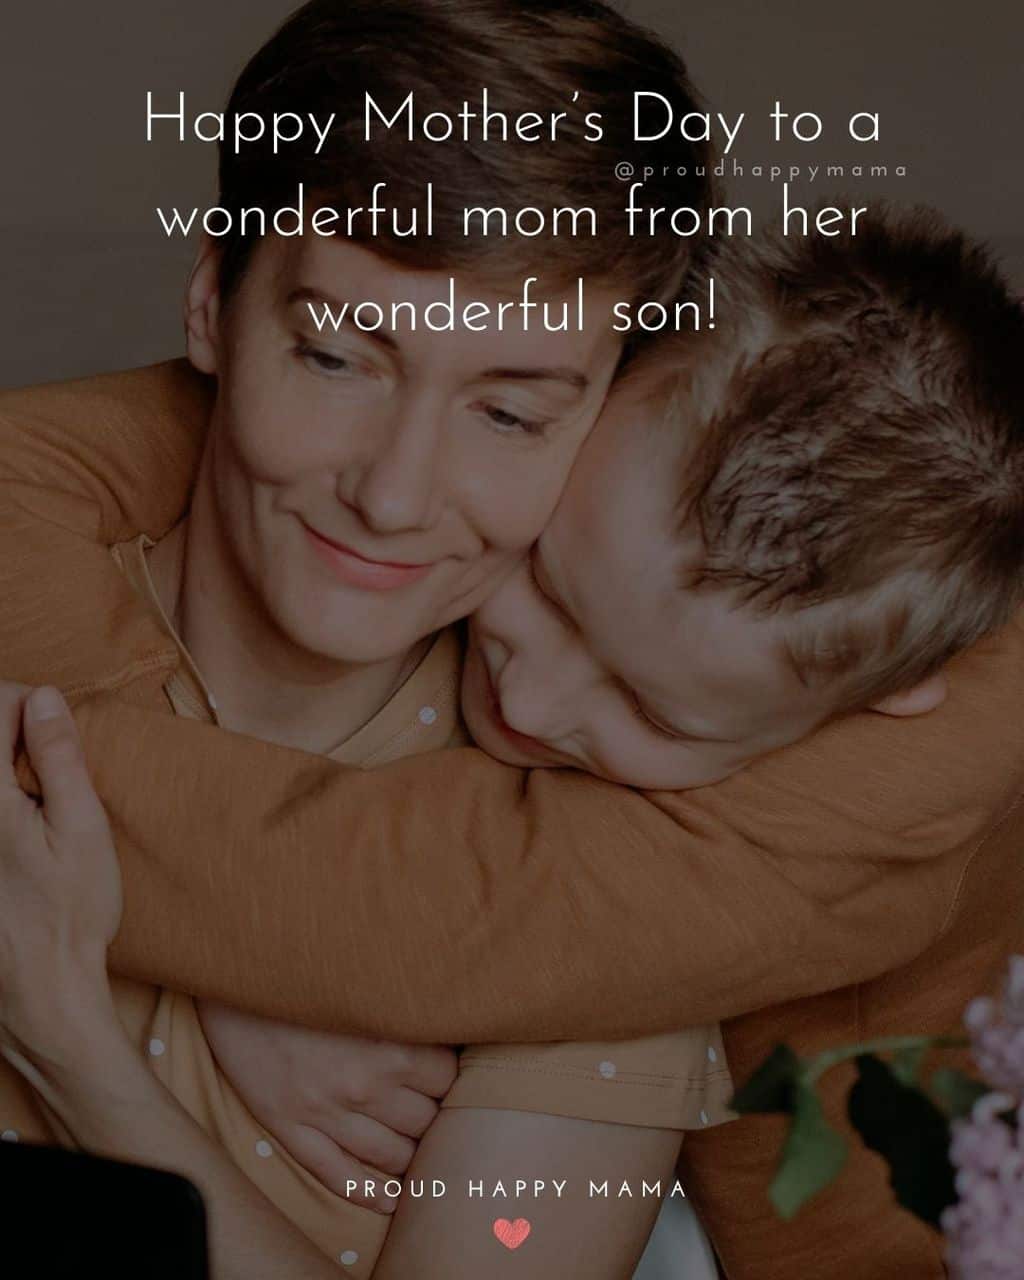 Happy Mothers Day Quotes From Son - Happy Mother’s Day to a wonderful mom from her wonderful son!’